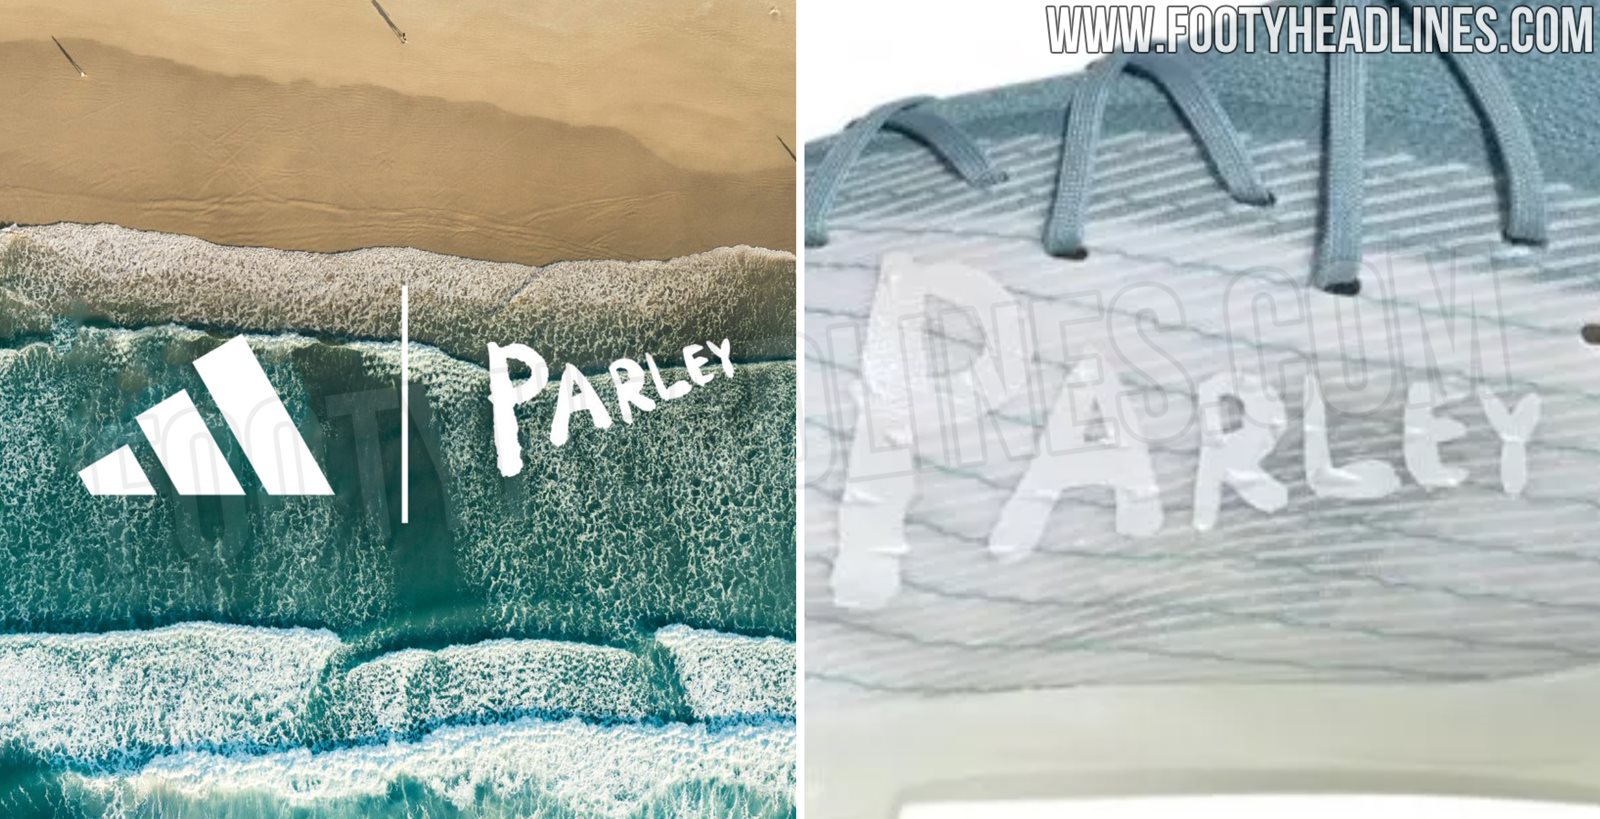 S'well x Parley – shop.parley.com